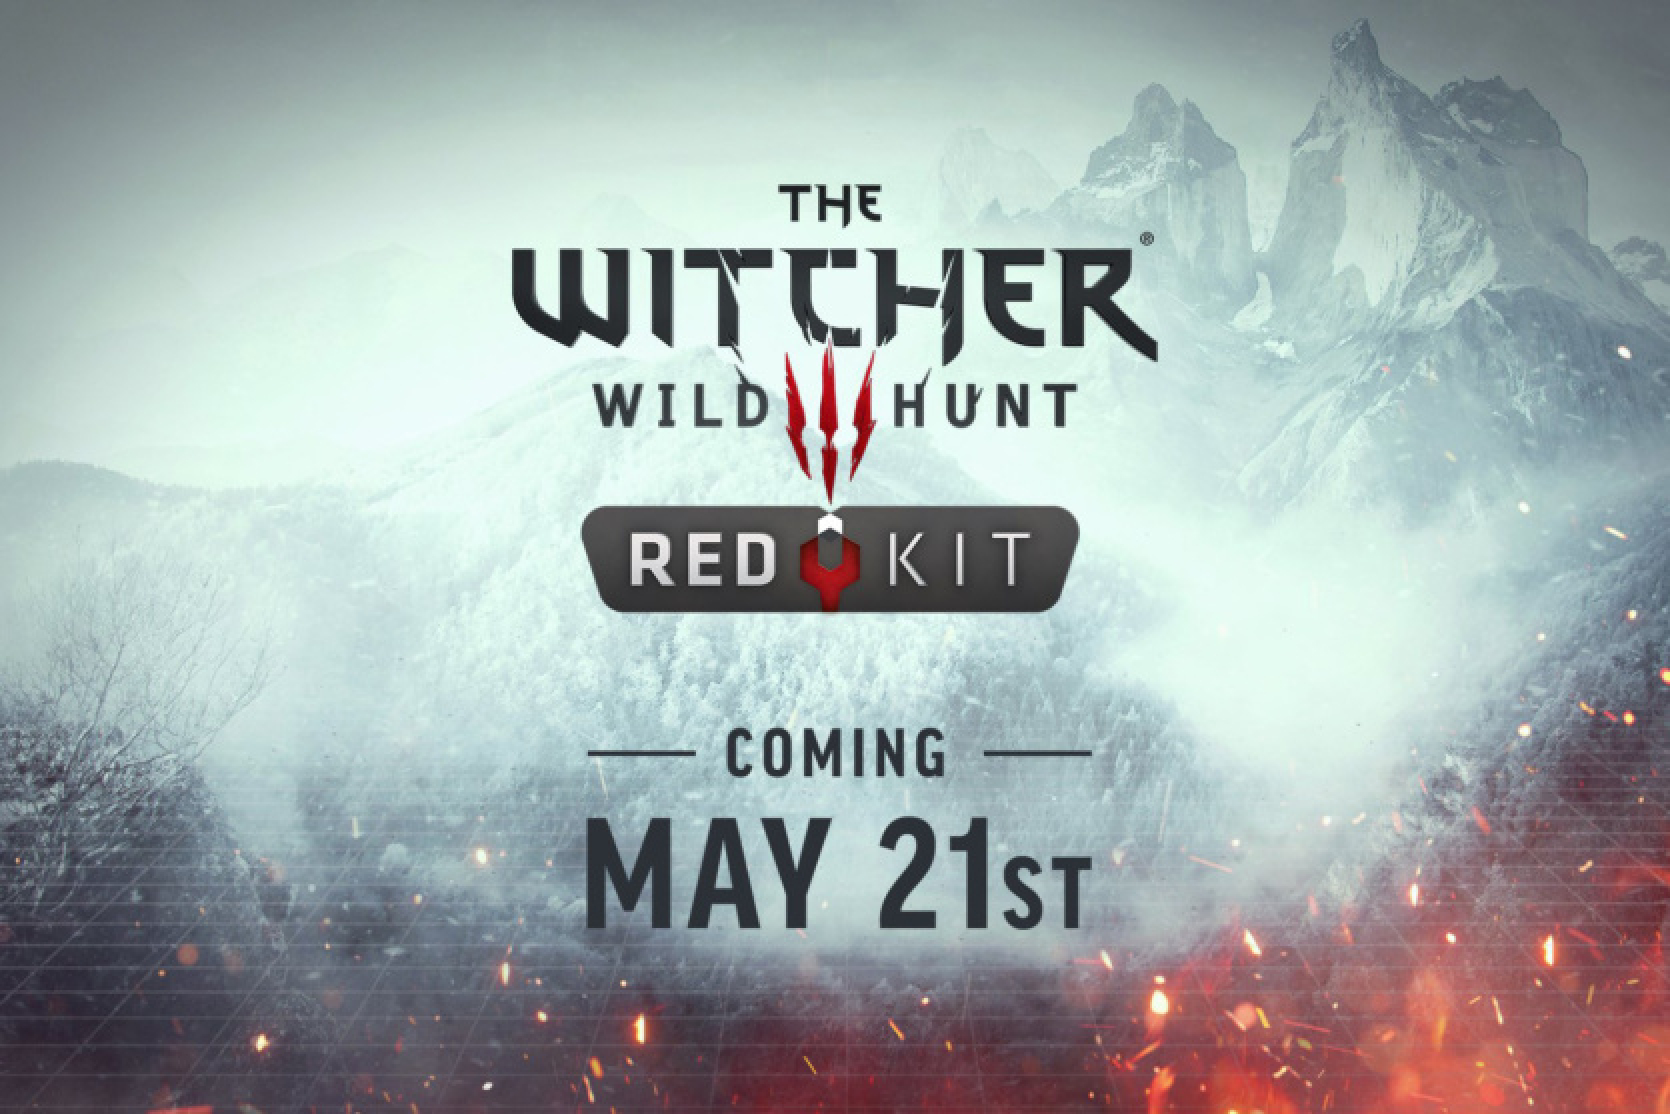 The Witcher 3 REDkit mod editor will be released on May 21 - it will be free for all owners of The Witcher 3: Wild Hunt on PC